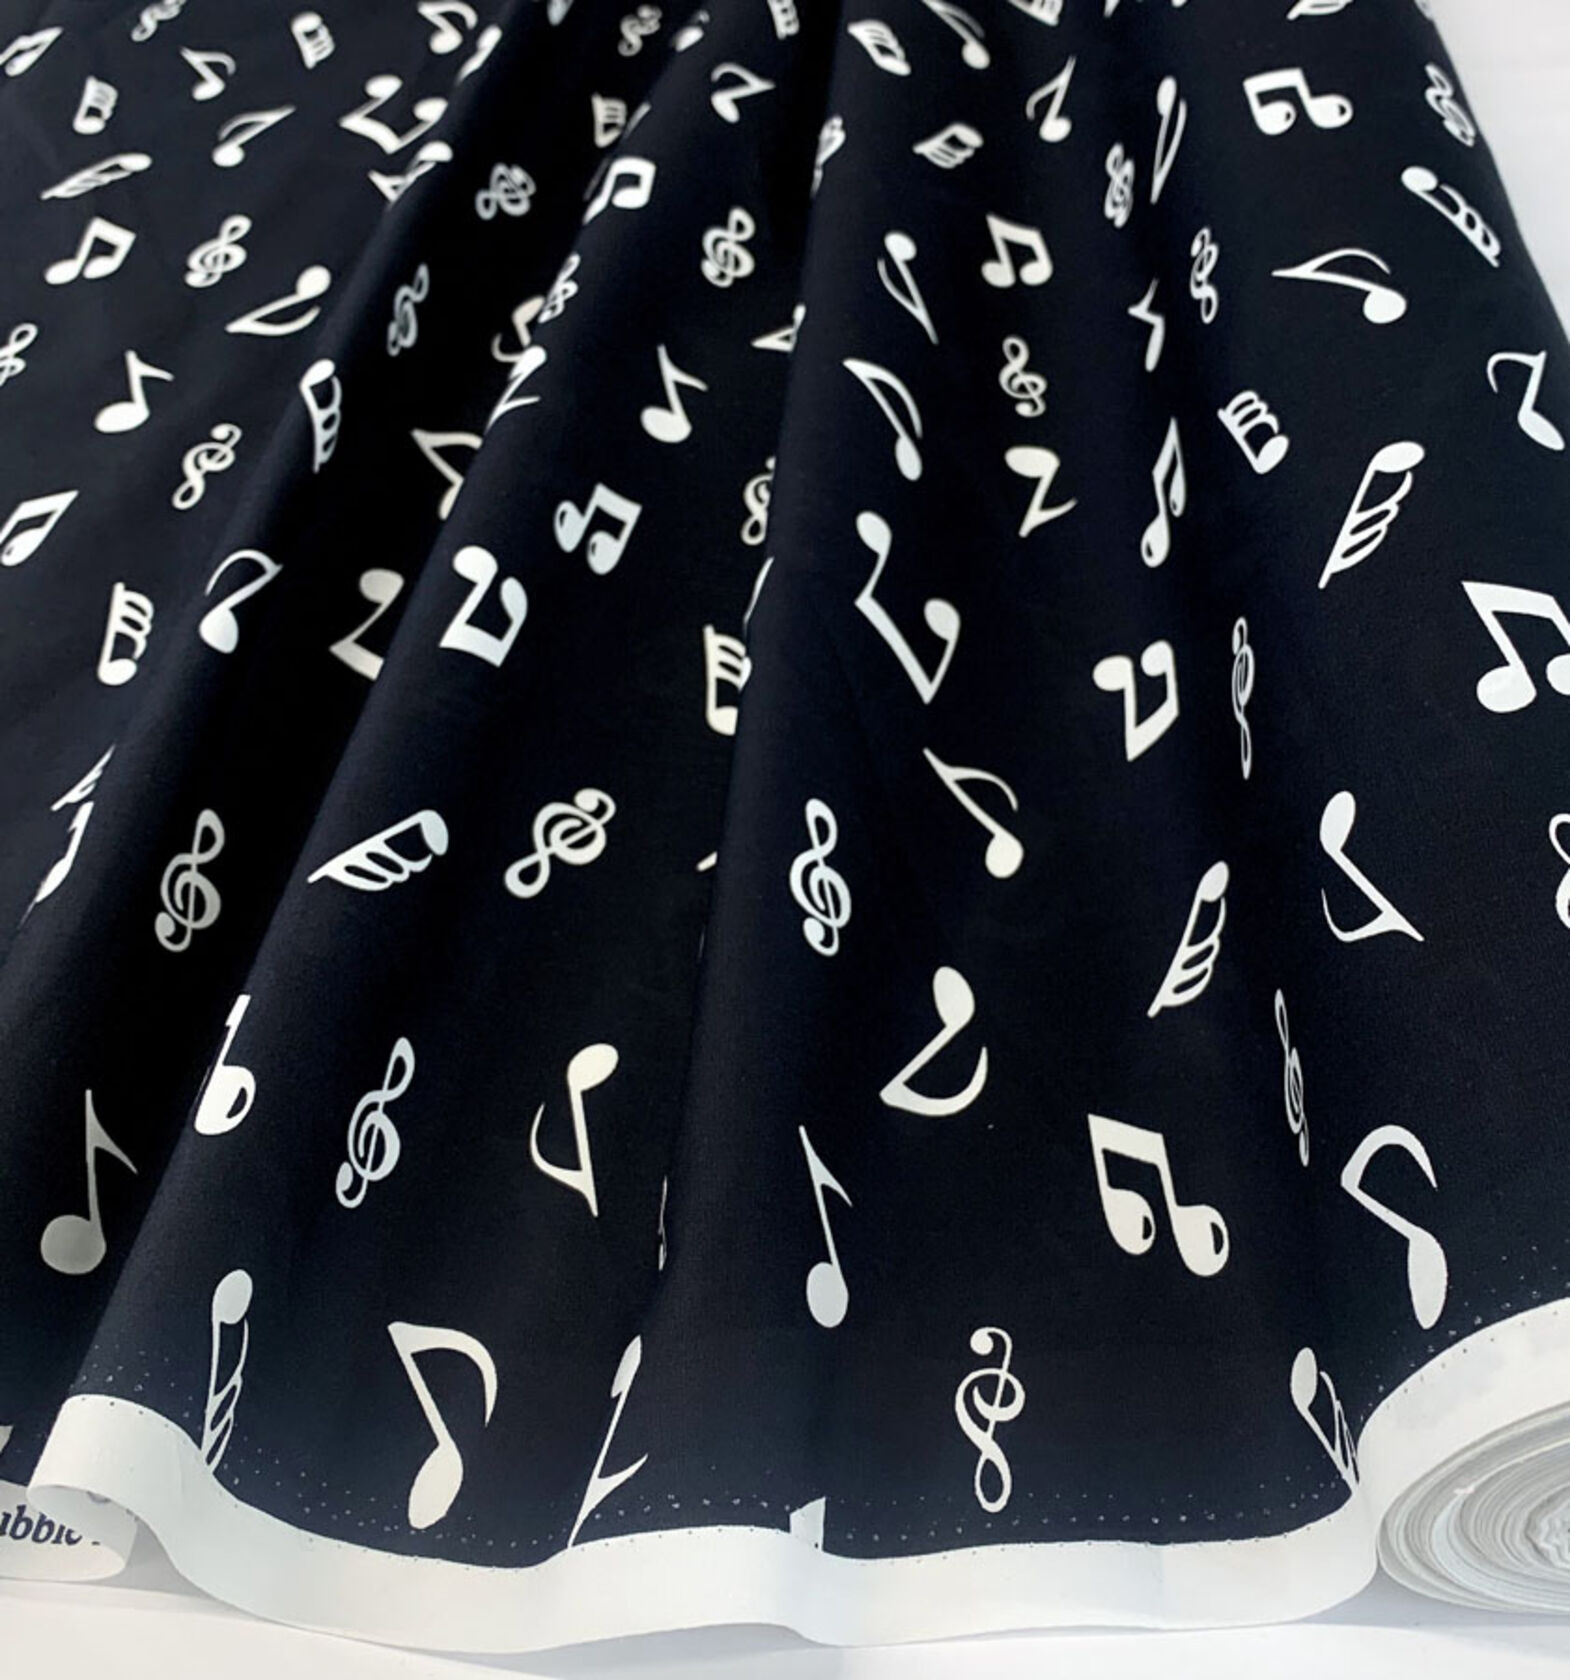 Music Note Fabric, Colorful Music Notes Fabric, Music Fabric, Novelty Fabric,  Cotton Fabric, Fat Quarter Fabric, Specialty Fabric, 